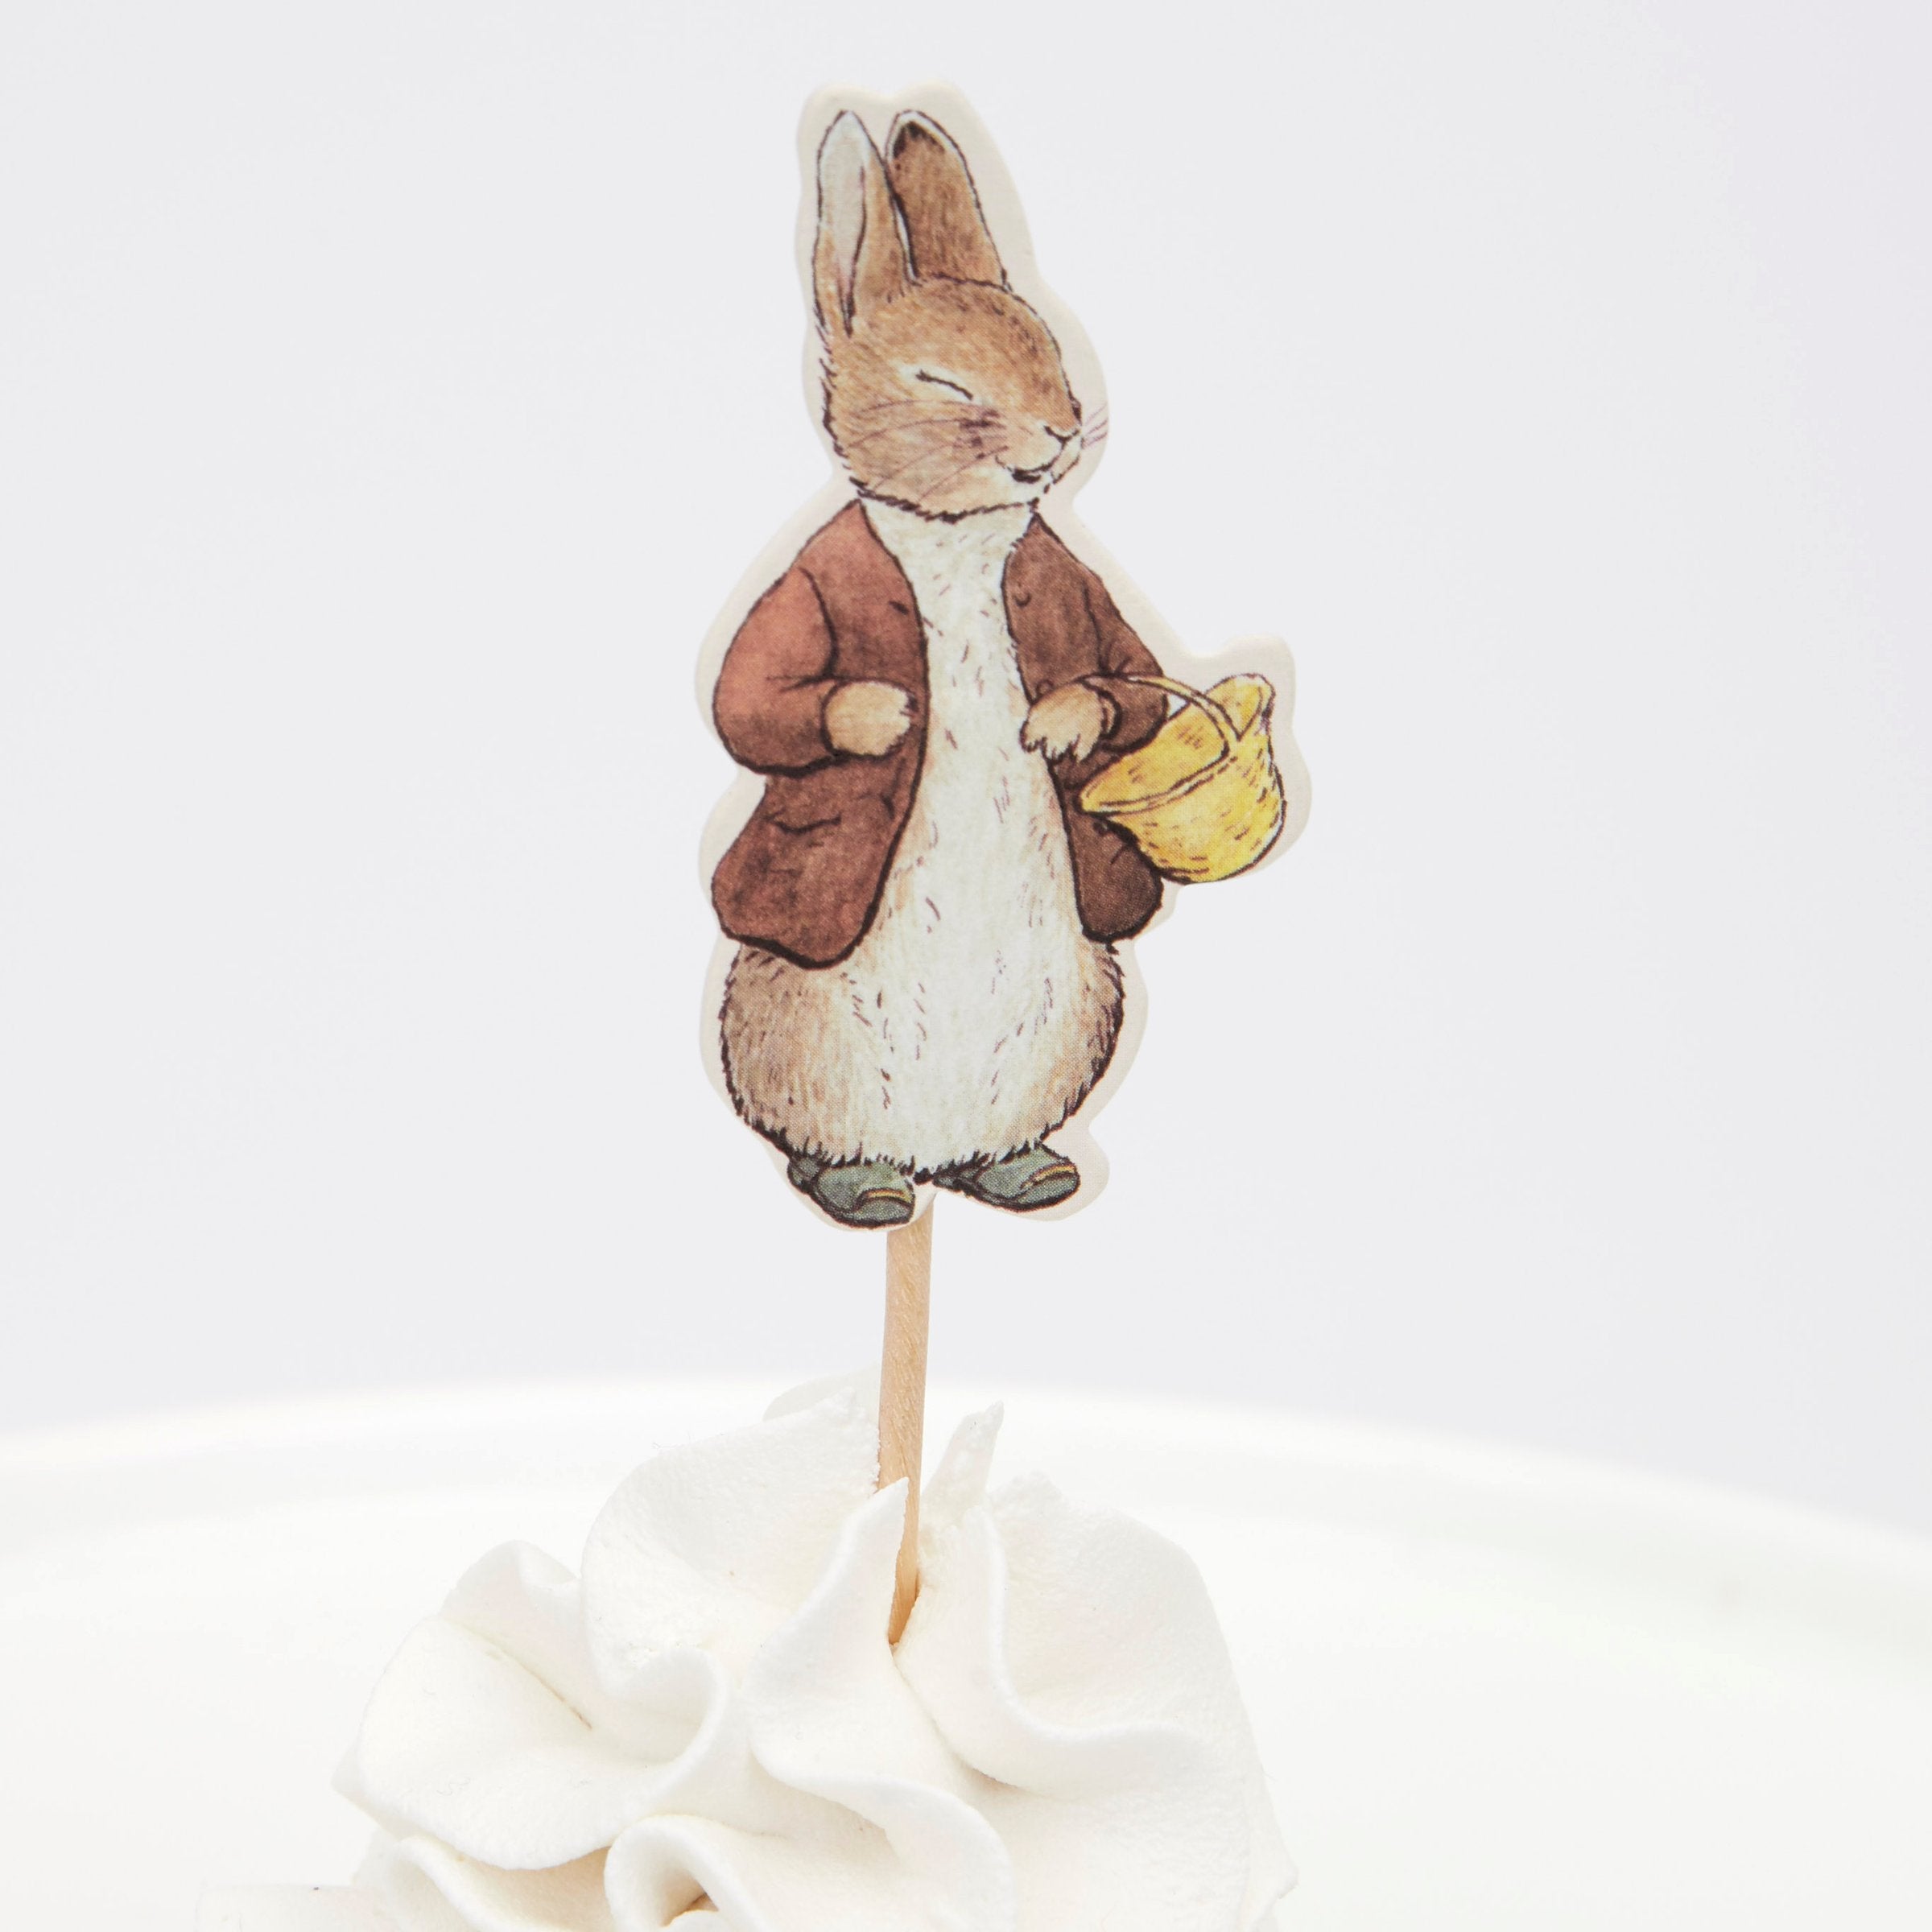 The set includes 4 charming designs, with Peter Rabbit, Benjamin Bunny, Tom Kitten and Jemima Puddle-duck.